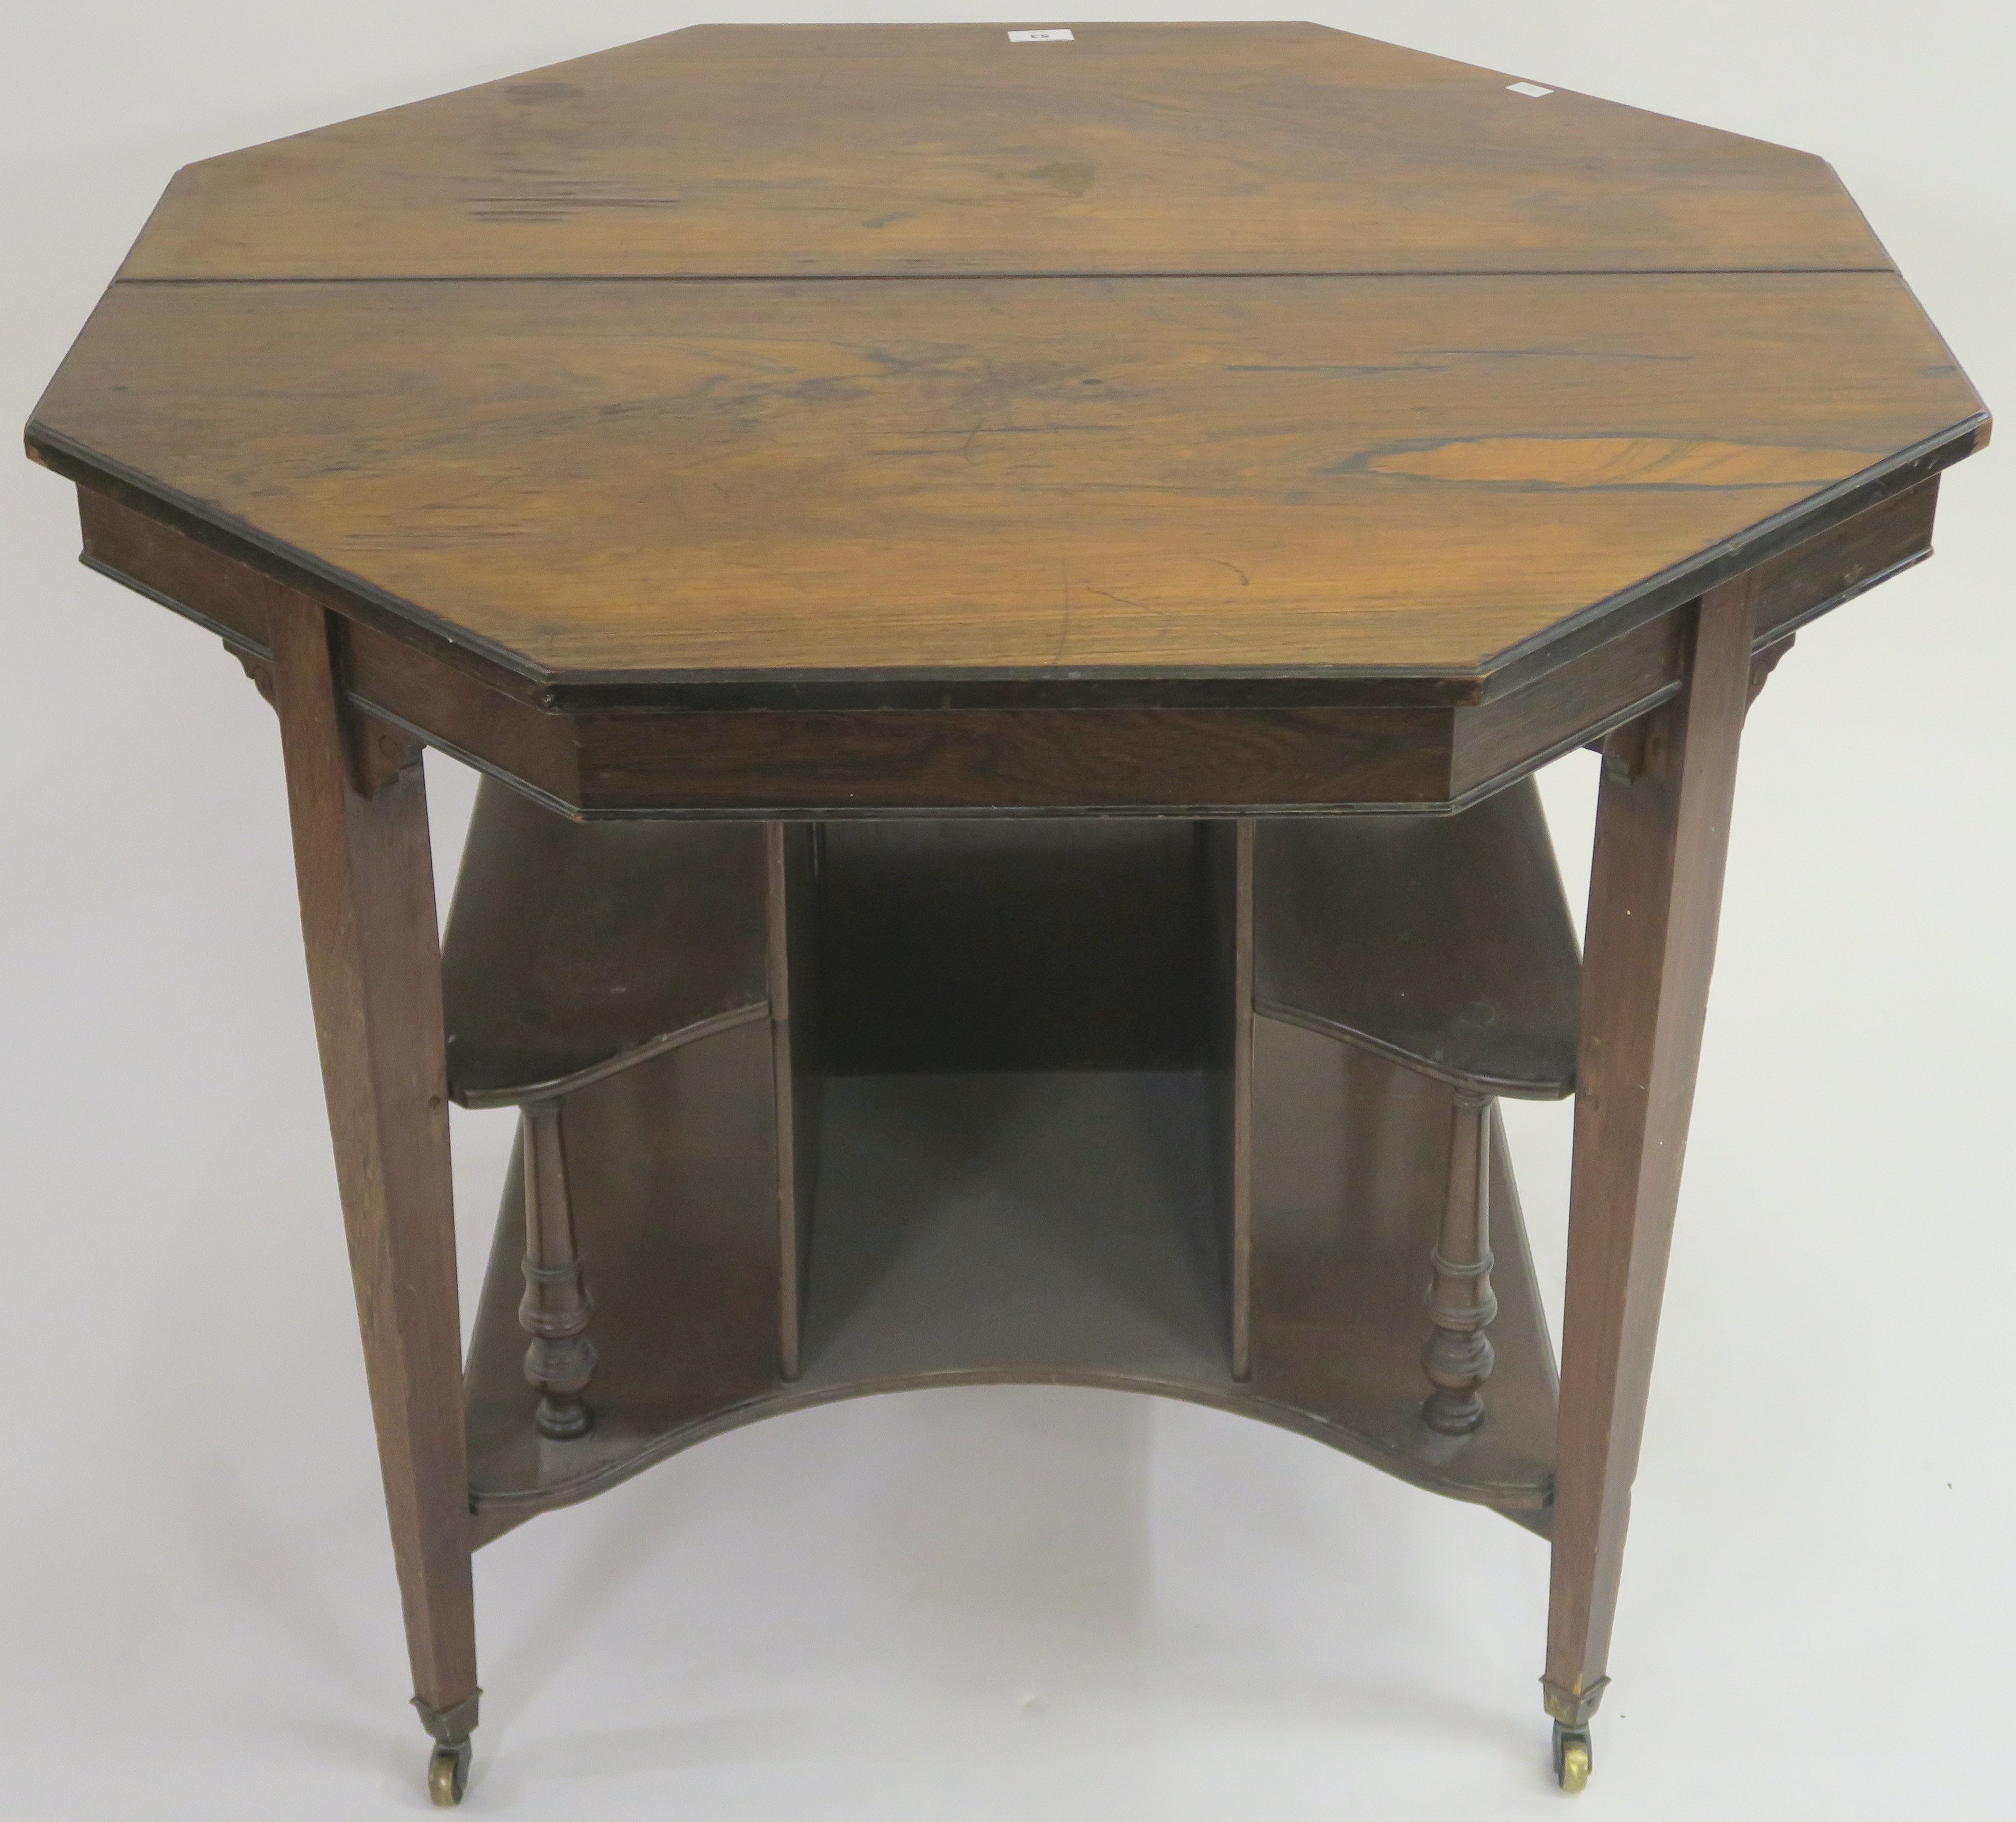 A Victorian rosewood octagonal table with lower shelves, 72cm high x 90cm wide x 90cm deep Condition